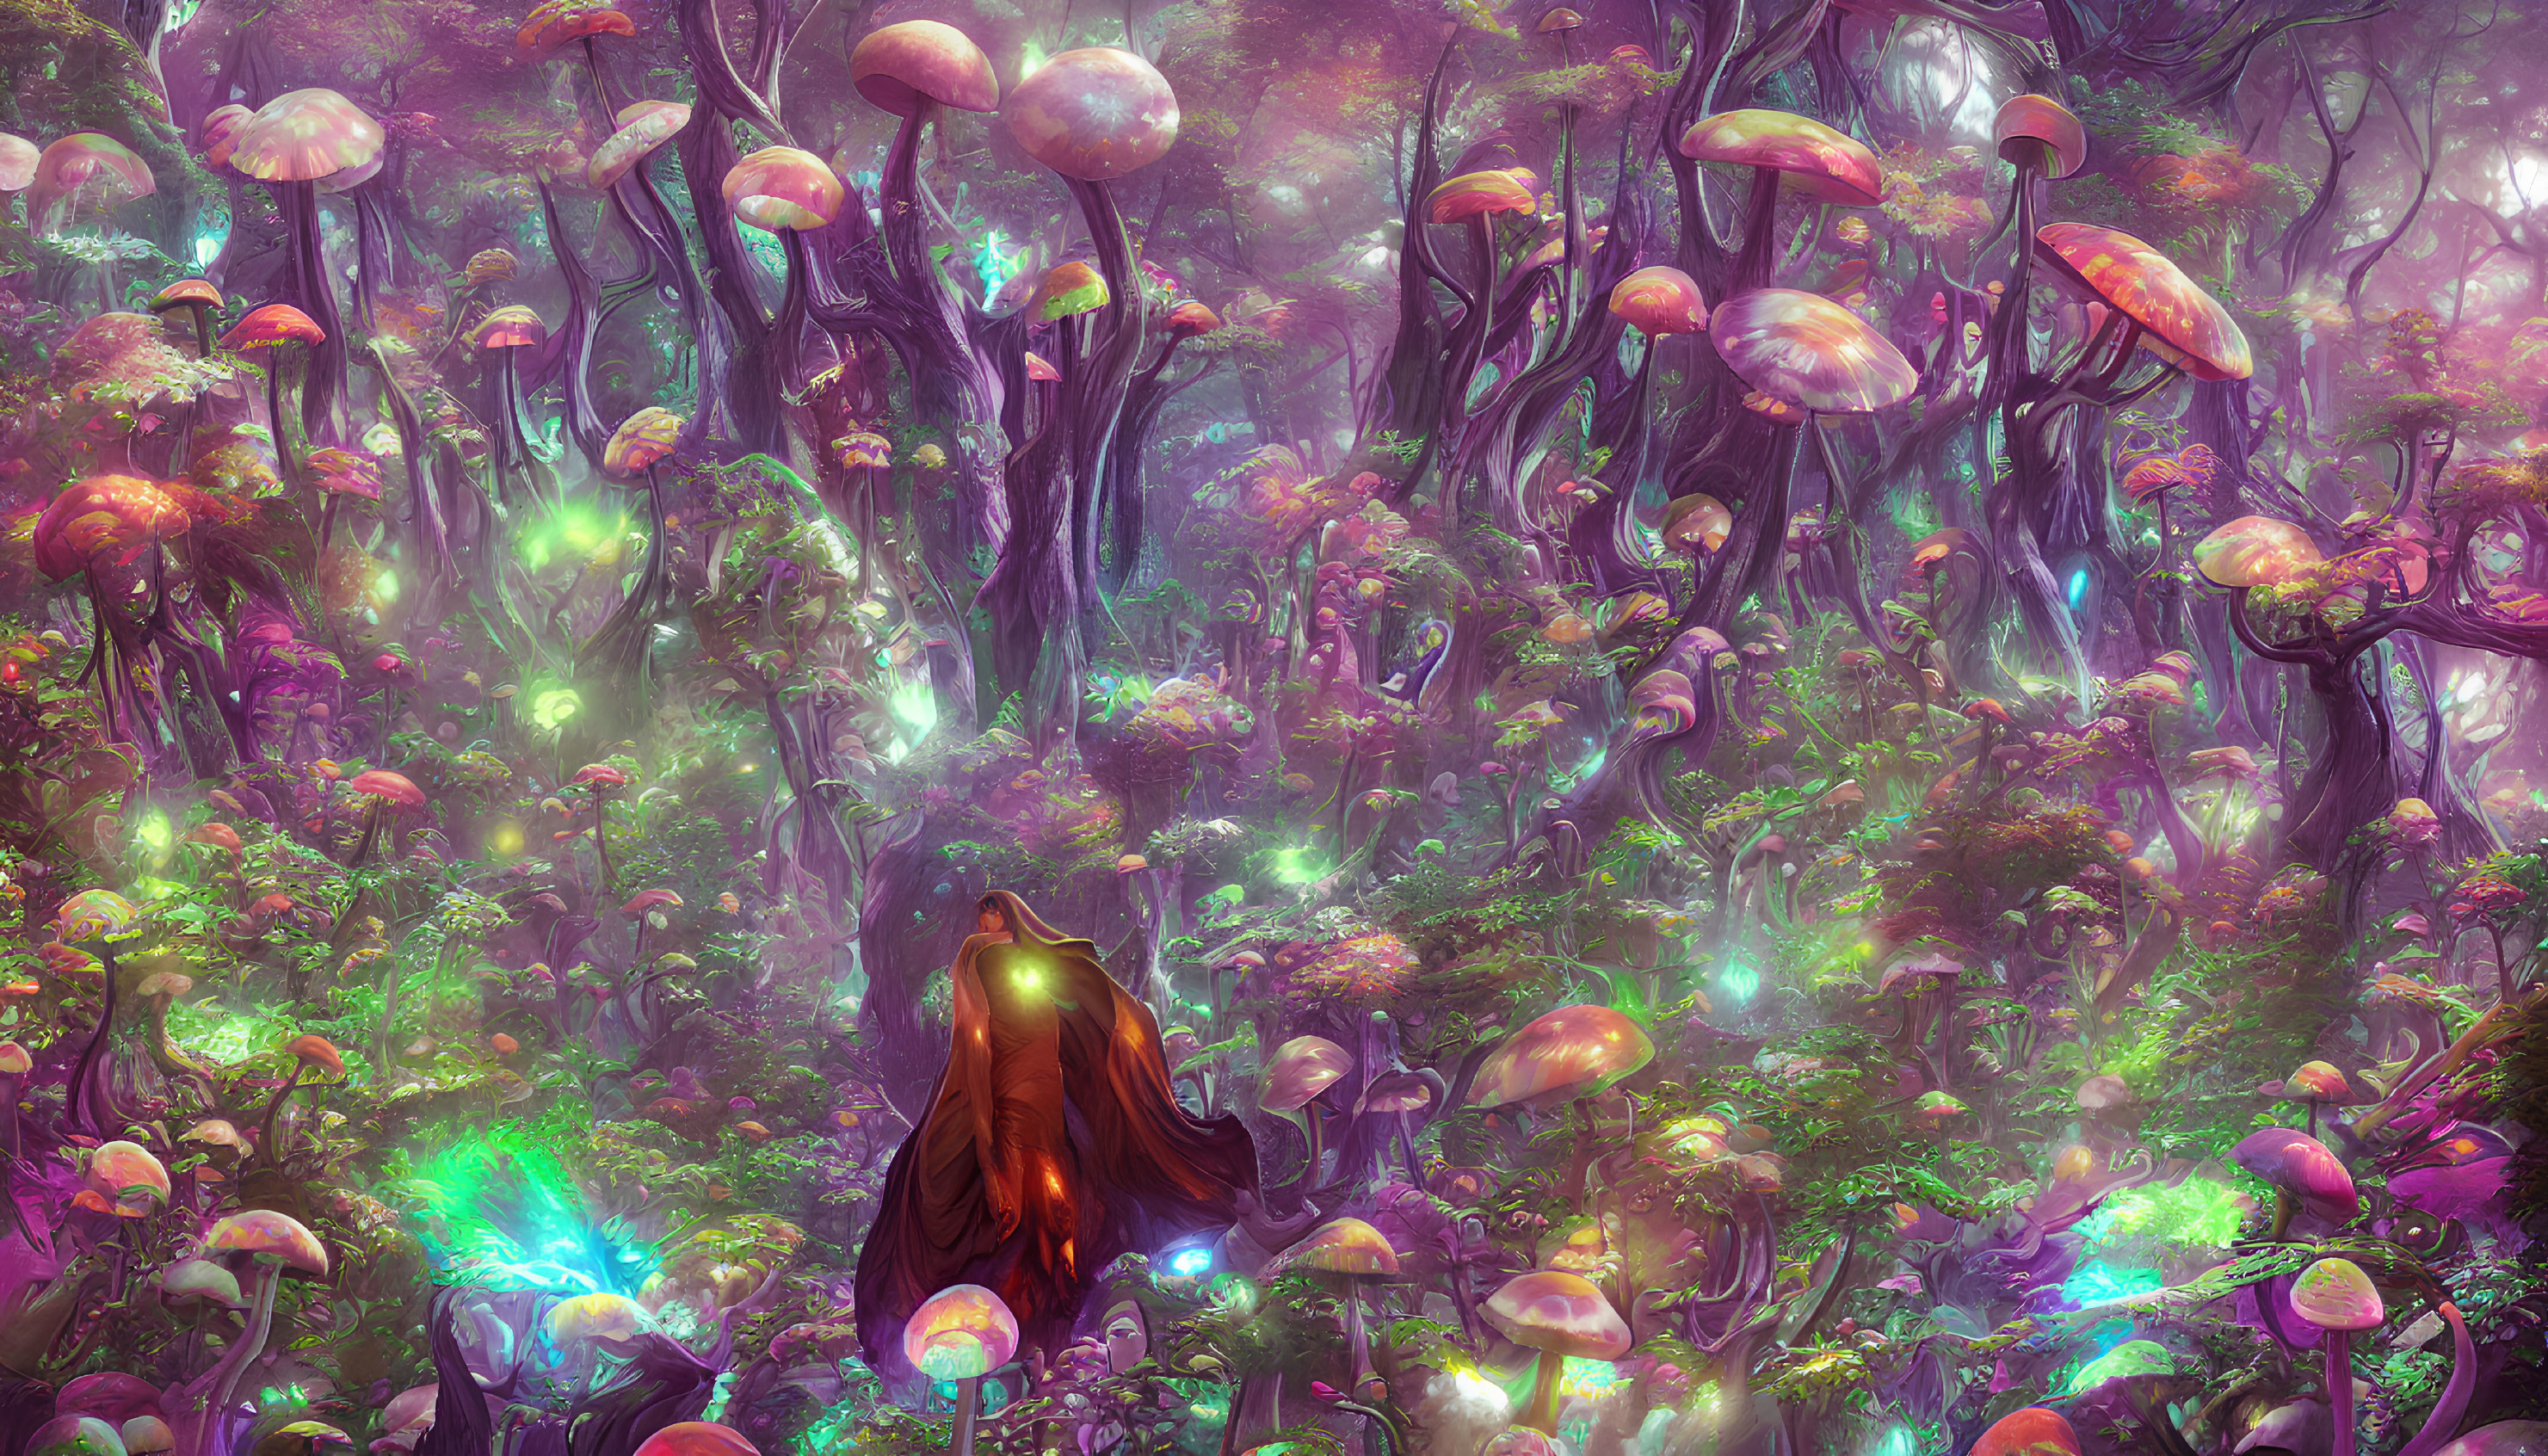 Vibrant oversized mushrooms in mystical forest scenery